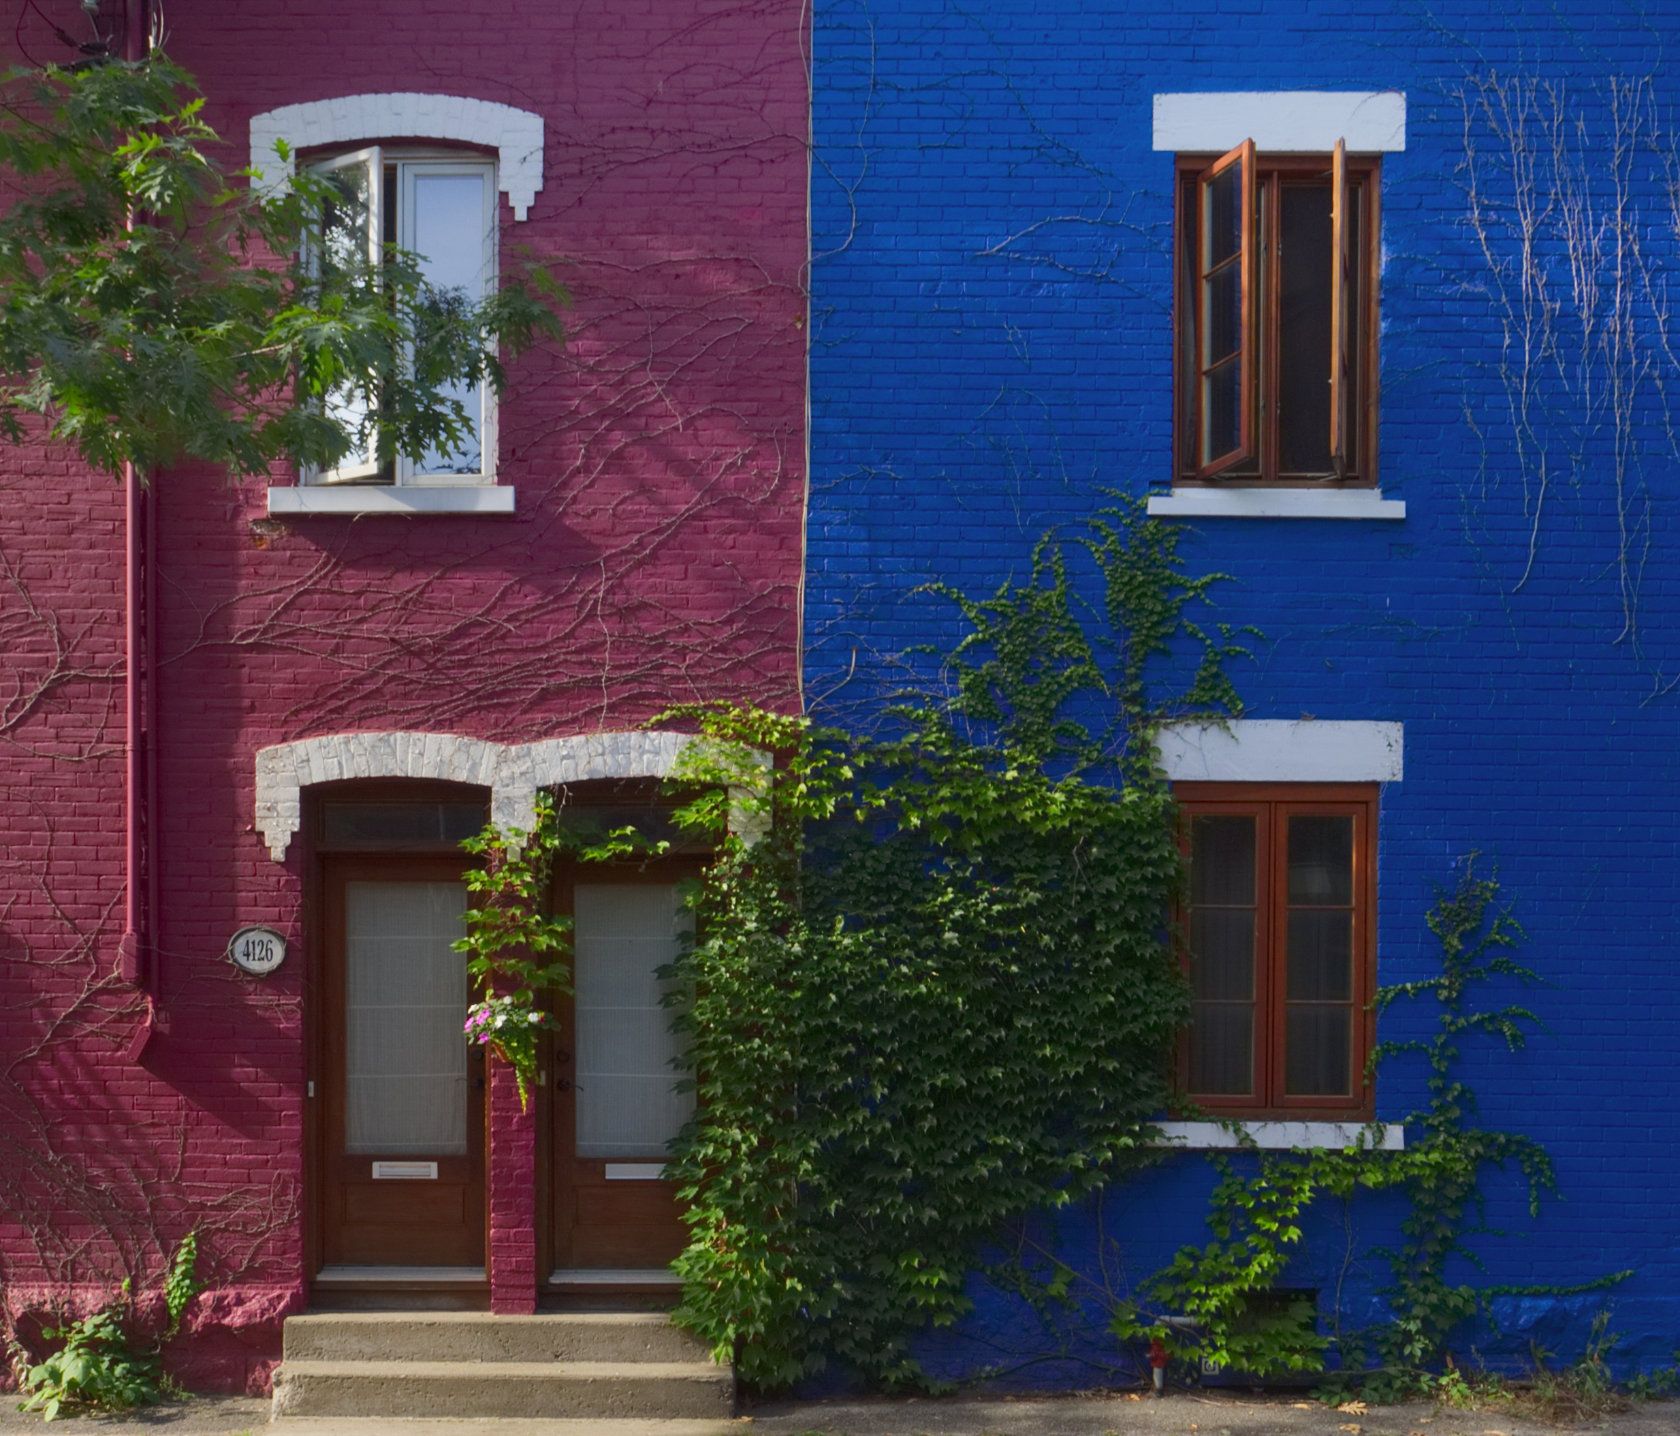 P8290552-colourful-houses-montreal.jpg